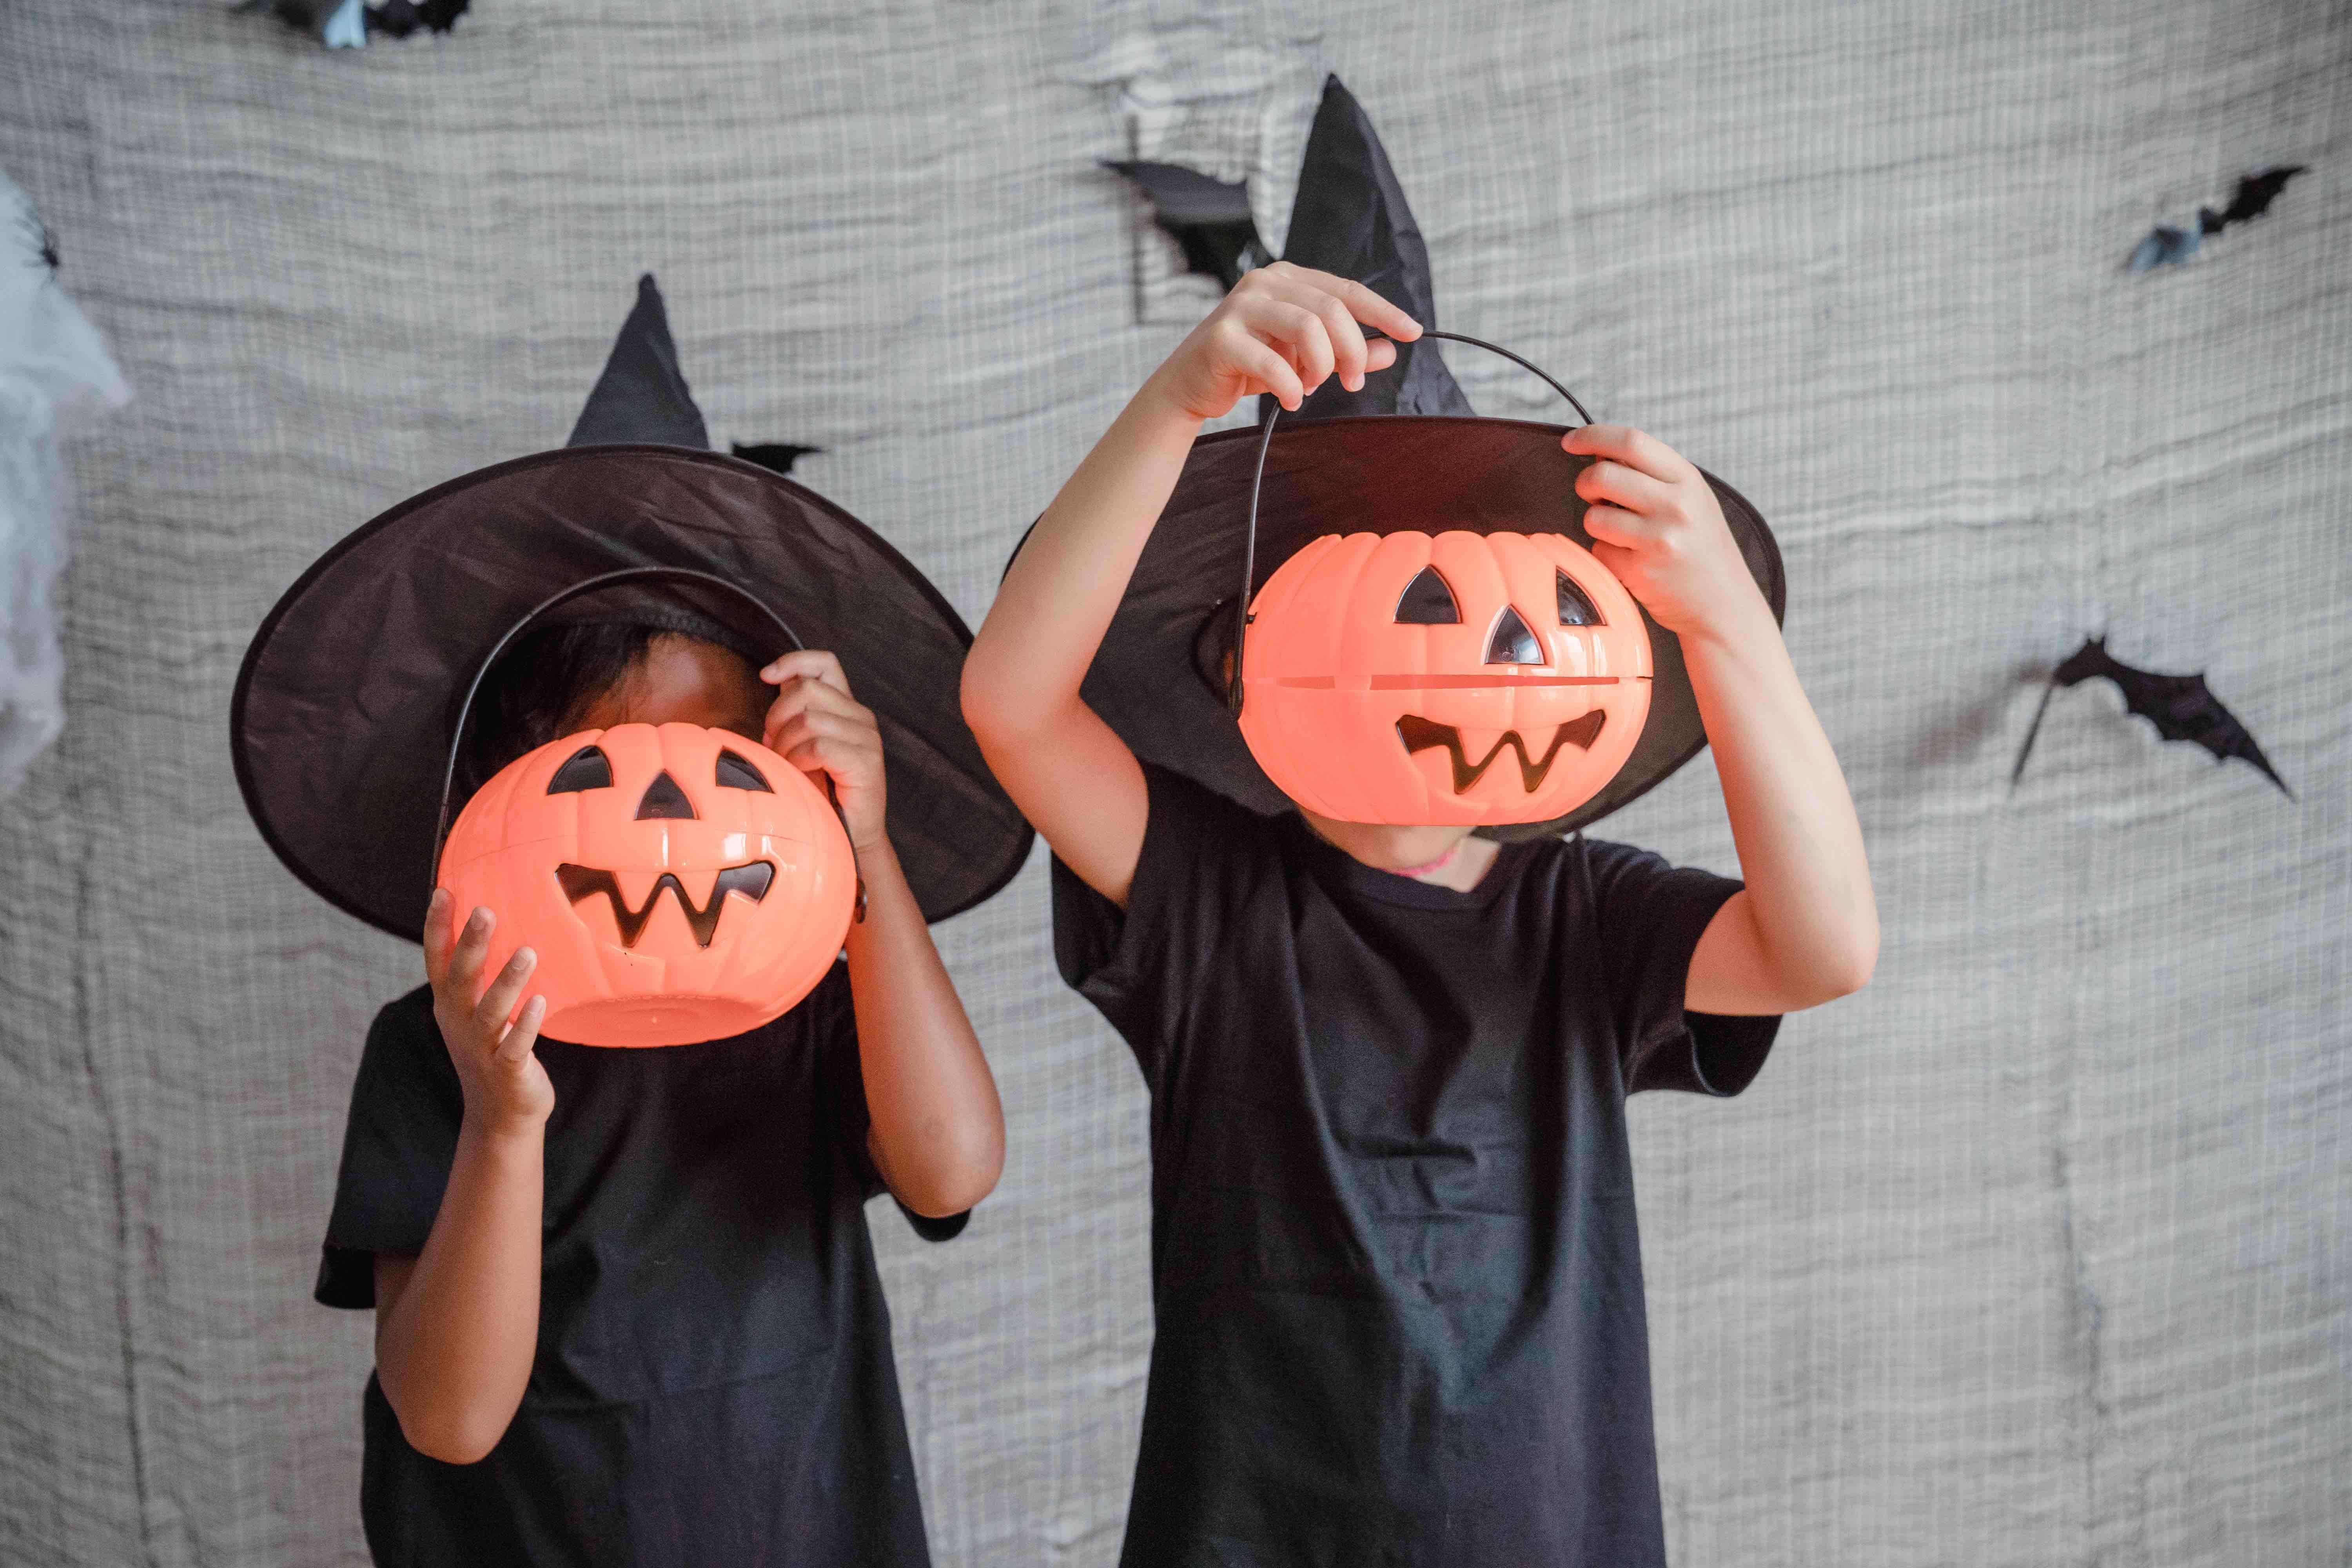 How to celebrate Halloween on a budget